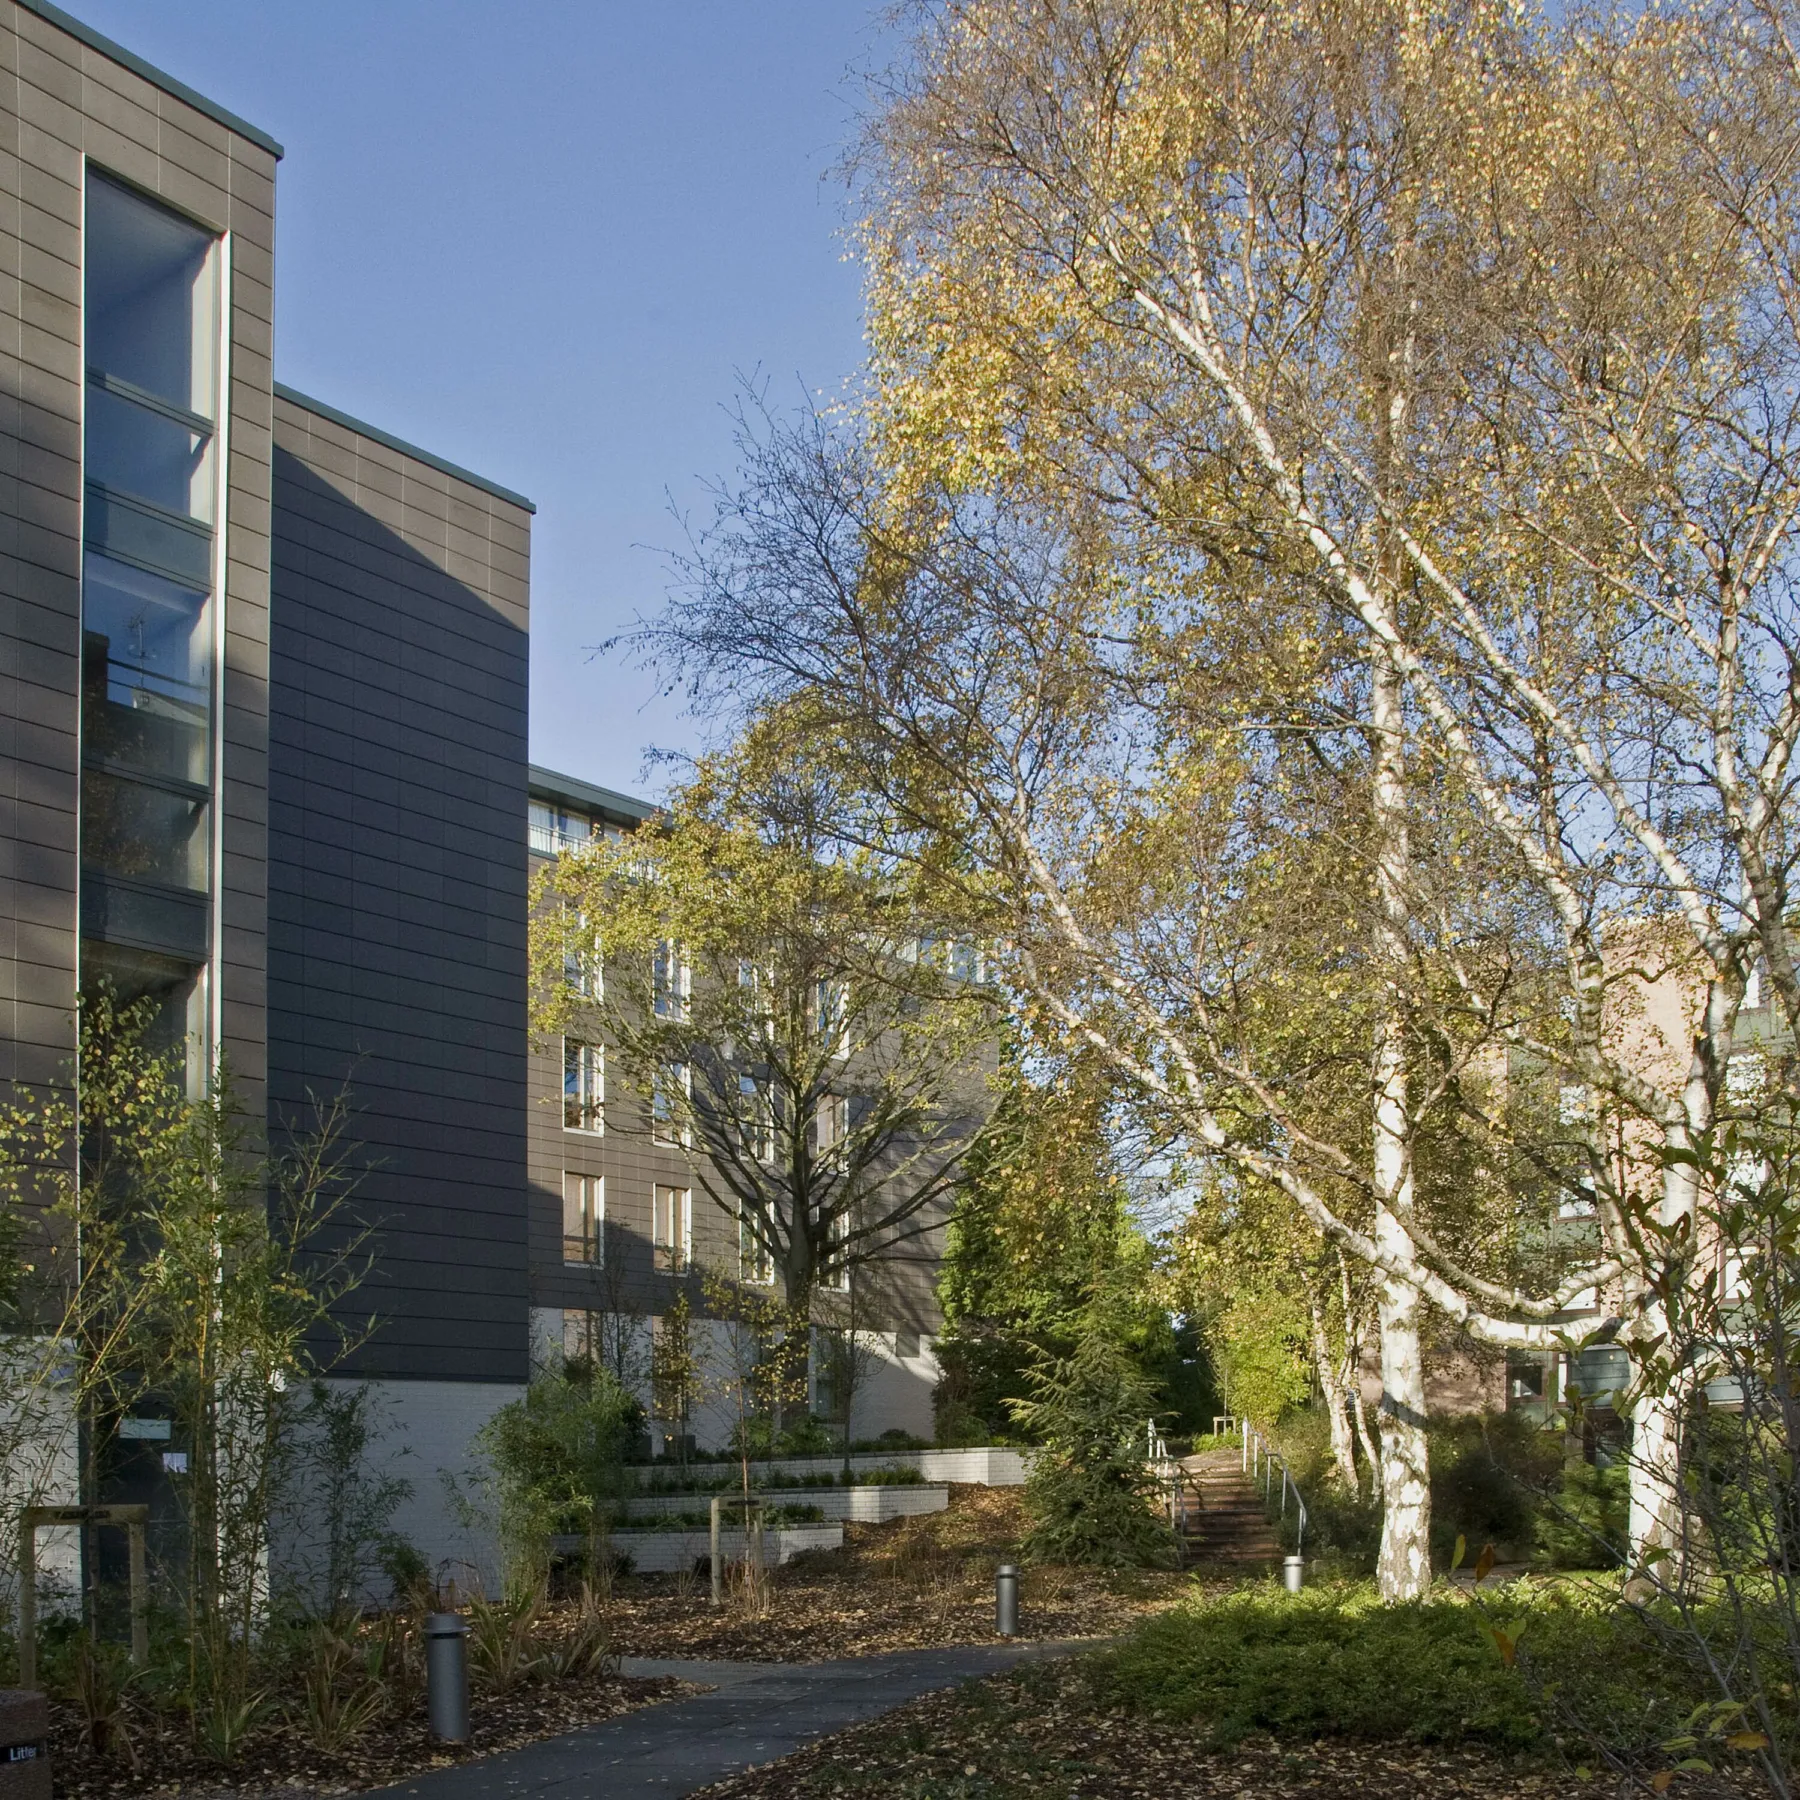 Student accommodation at Pollock Halls, University of Edinburgh - John Burnett House. Pale brick ground floor with bronze coloured cladding on the storeys above. The building is set within landscaped grounds with mature trees.